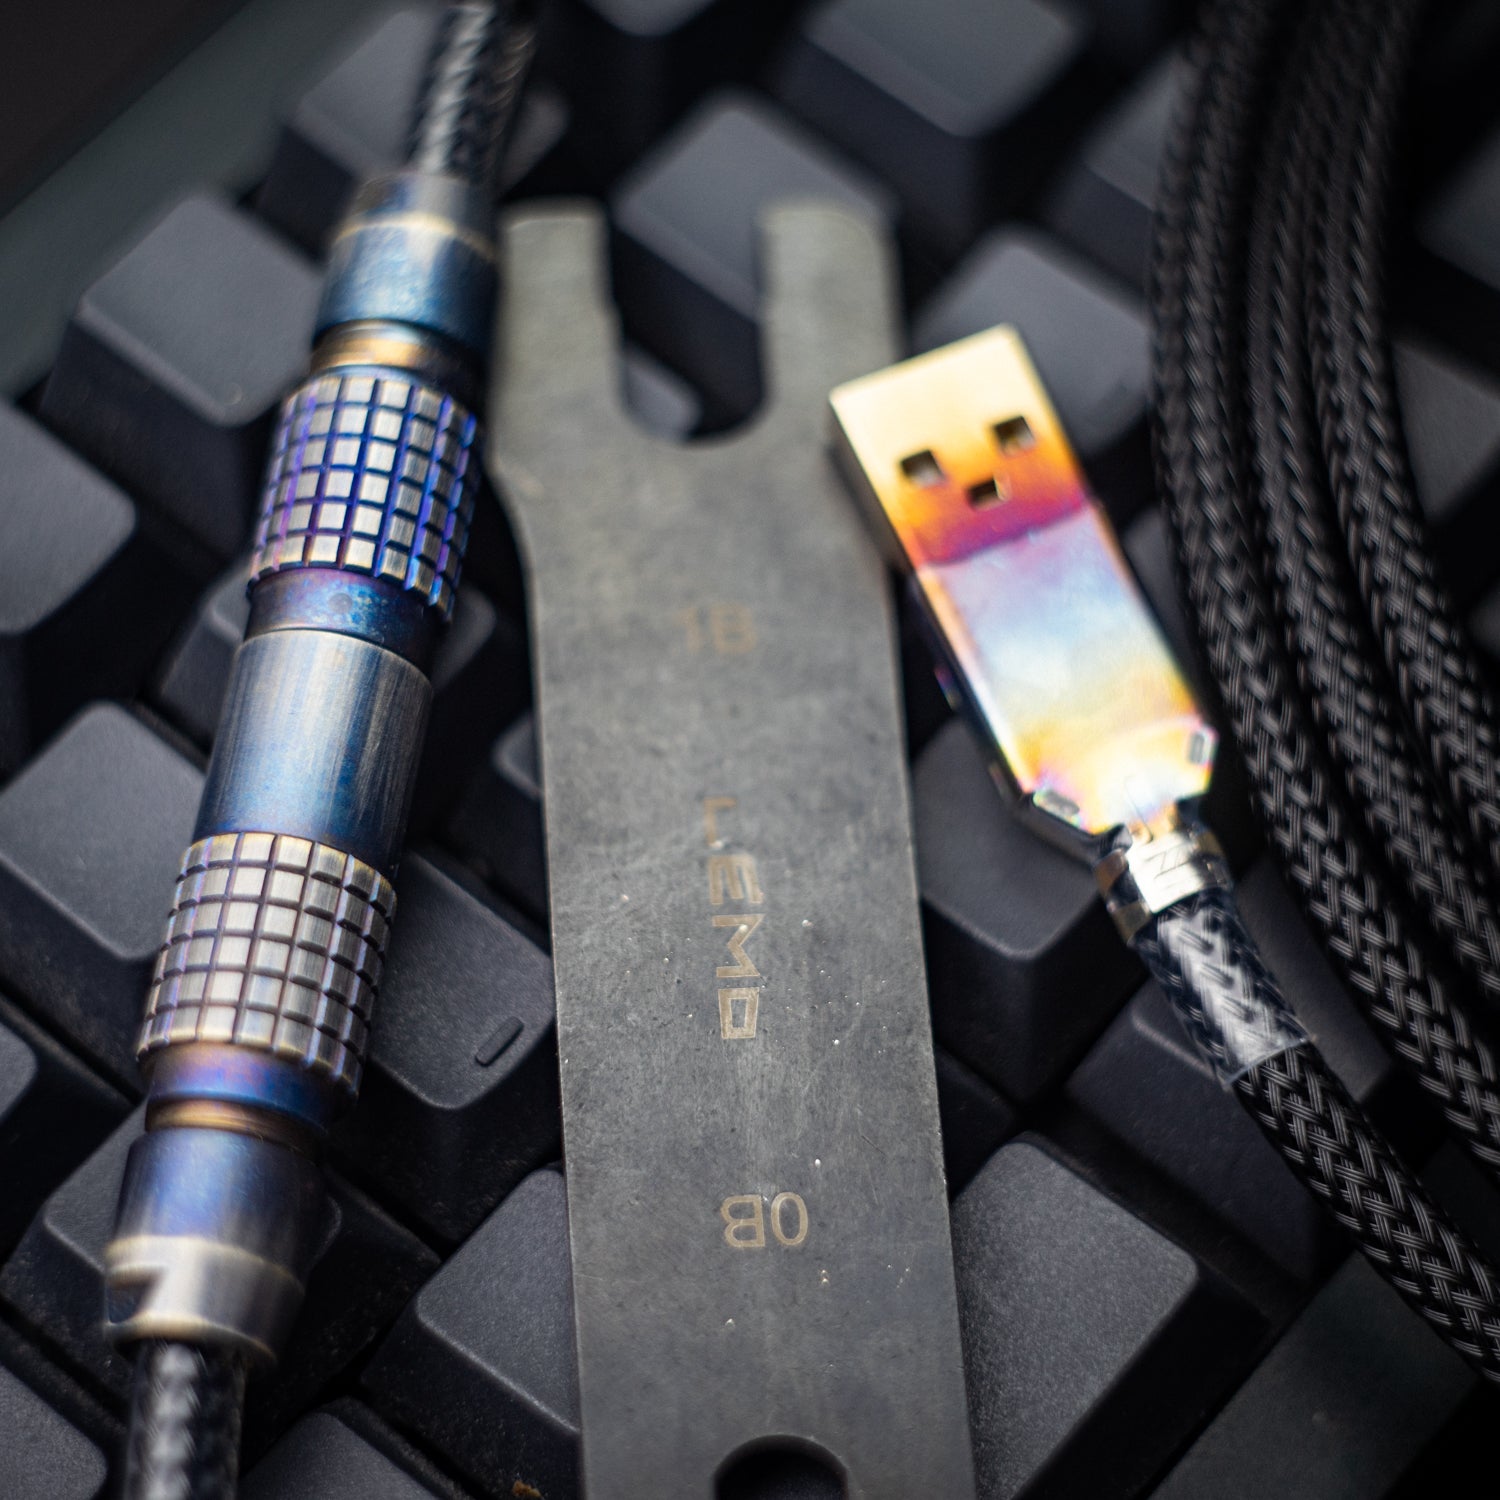 Case Hardened, Patina style Mechanical keyboard cables in your choice of MDPC-X, 550 paracord and Techflex, coils USB connectors.